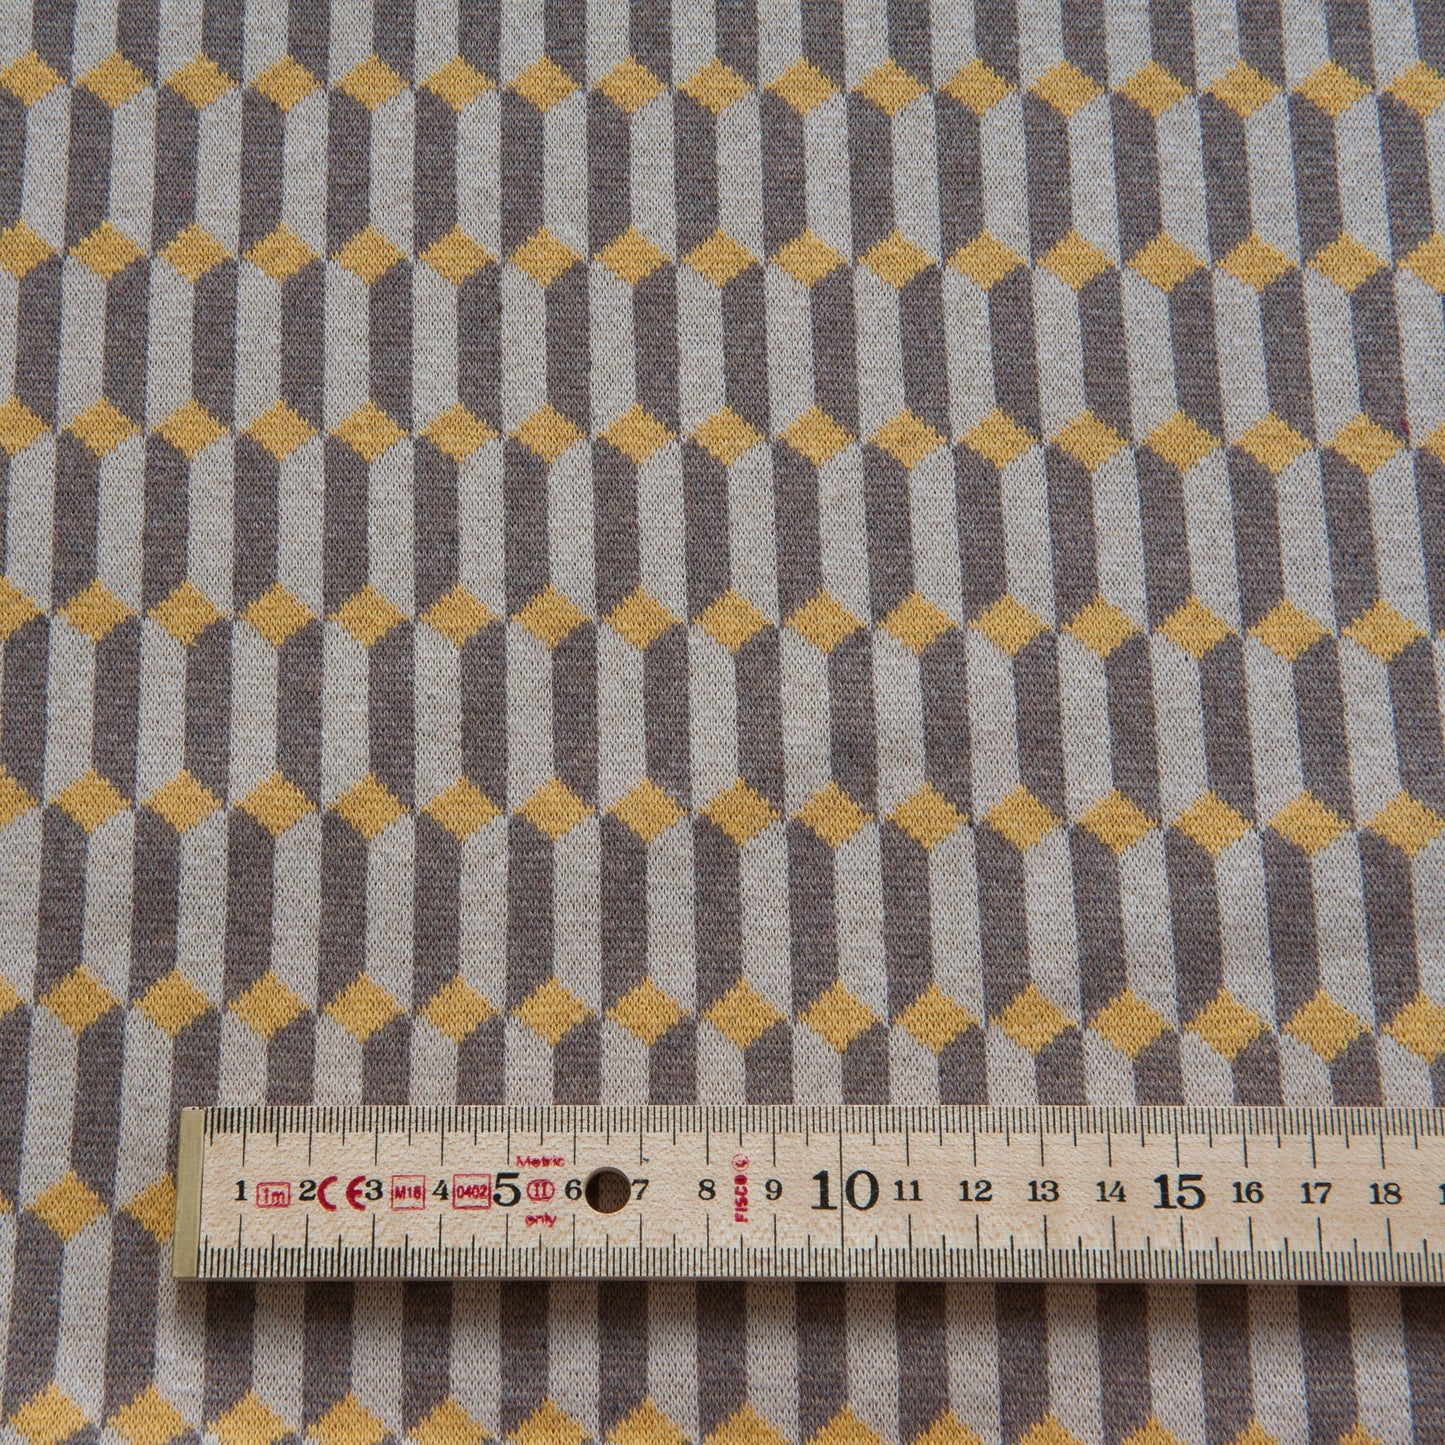 Geo Towers Recycled Cotton Jacquard Knit Fabric in Beige - 1m piece